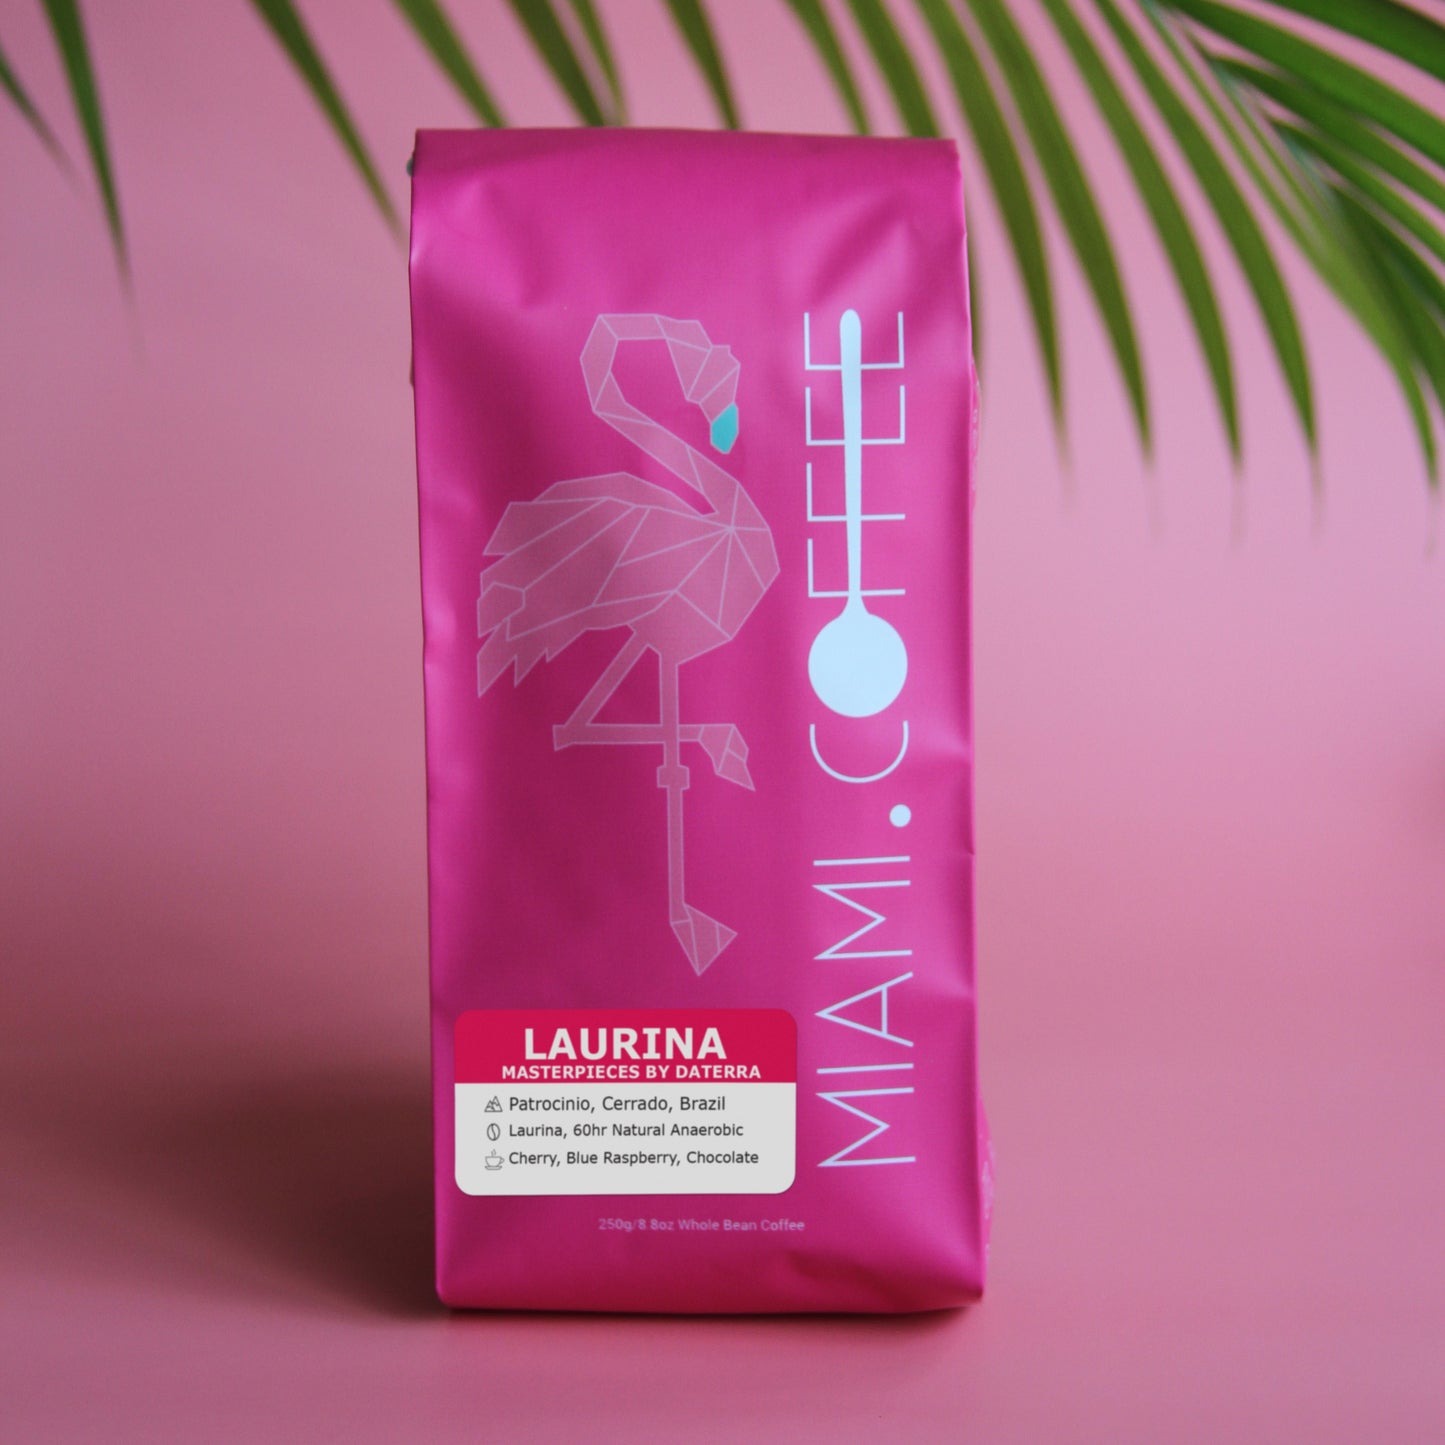 250 gram bag of Miami dot Coffee, Laurina - Masterpieces by Daterra Sustainable and Climate Friendly Coffee Farm in Patrocinio, Cerrado, Brazil. Laurina cultivar processed by a 60 hour Natural Anaerobic Fermentation. Tasting notes of cherry, Blue raspberry, and chocolate